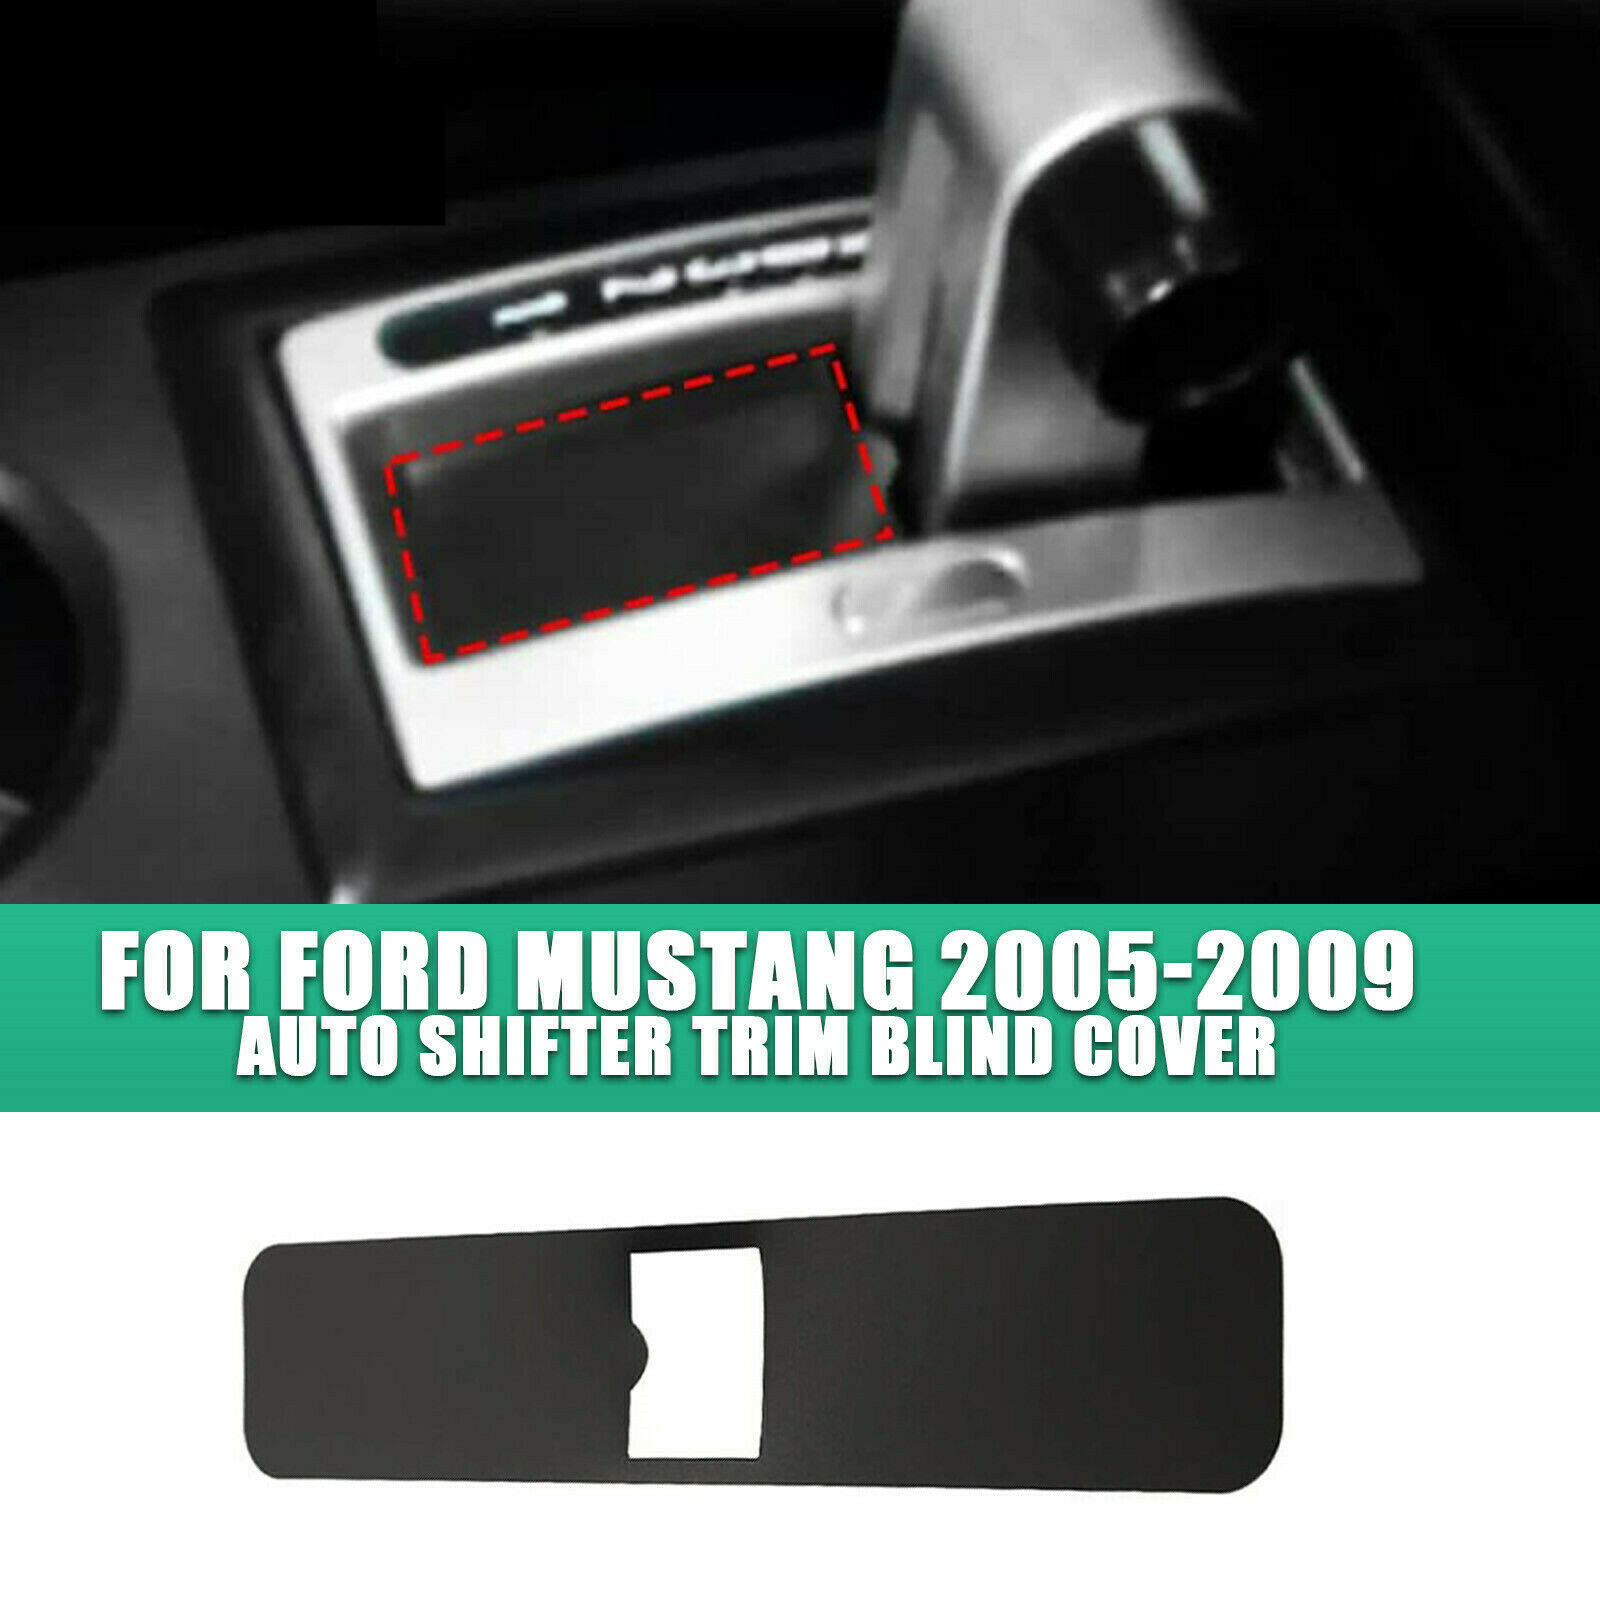 For 2005 -09 FORD MUSTANG AUTO SHIFTER TRIM BLIND COVER REPLACE DURABLE